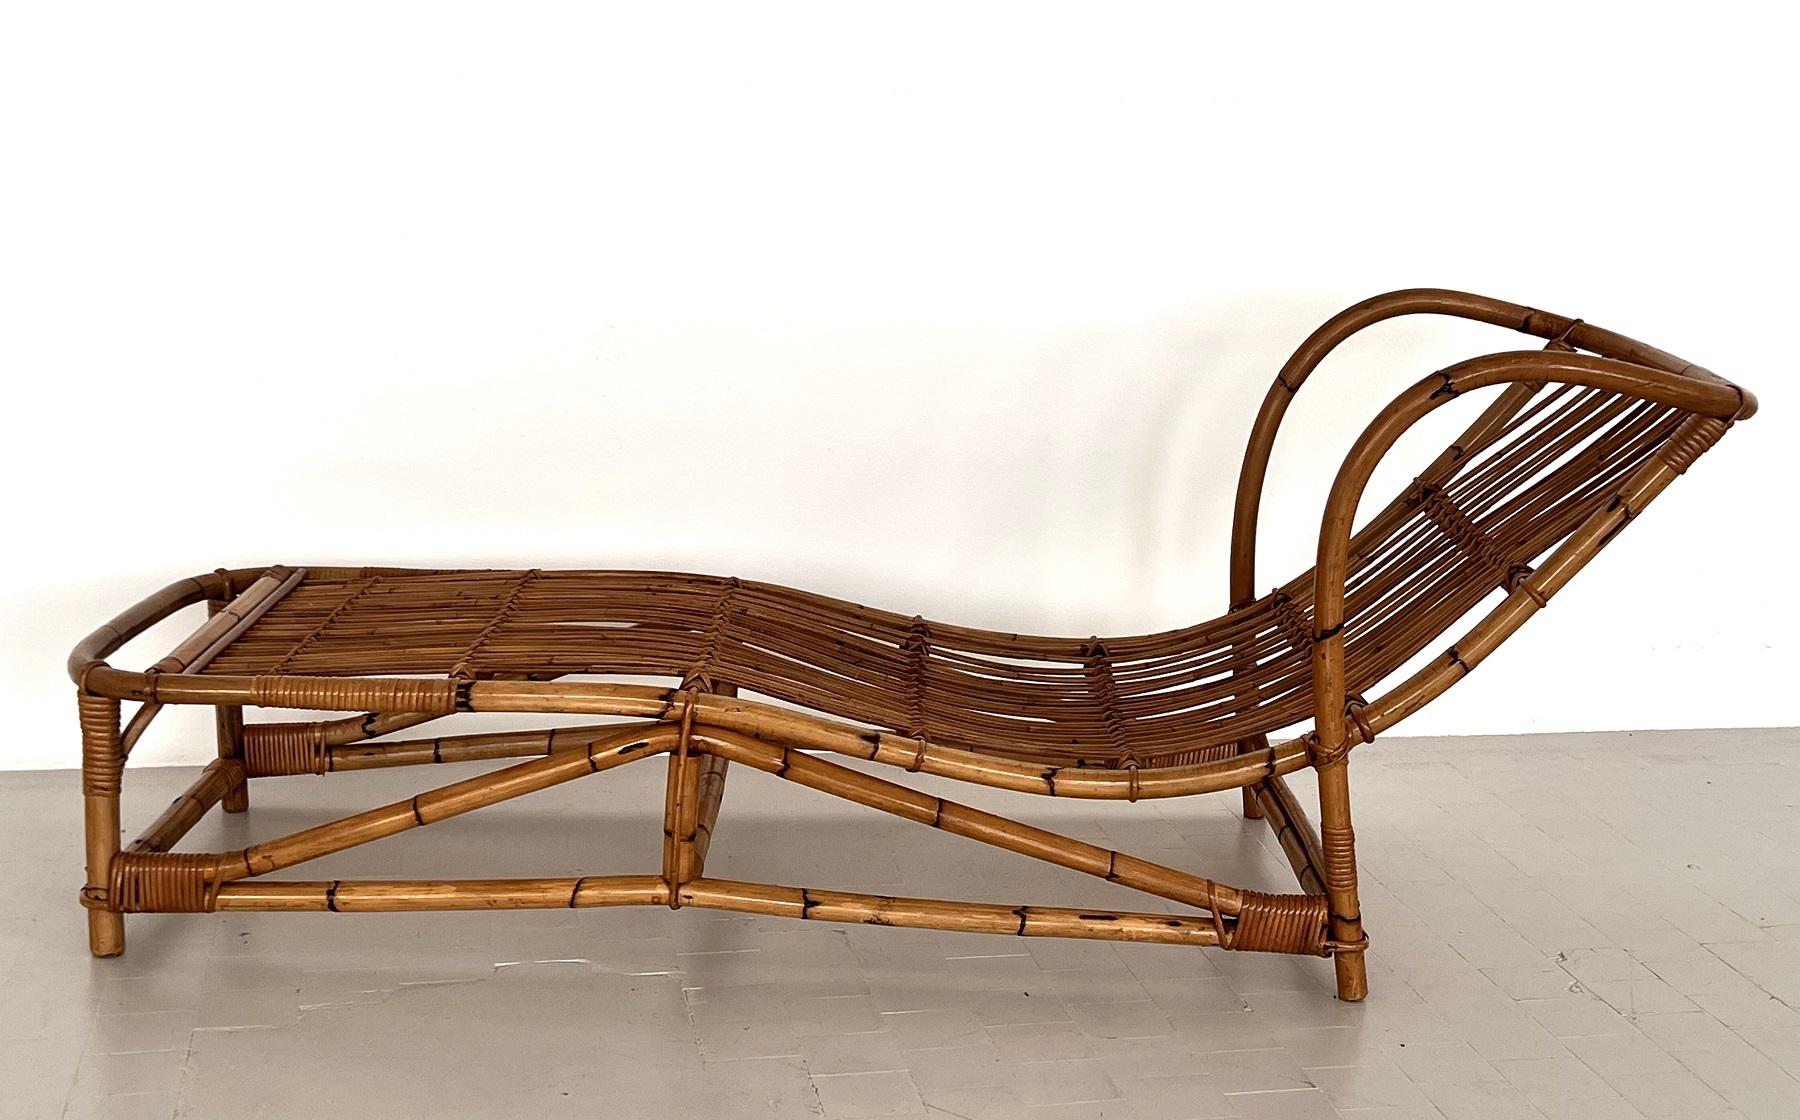 Italian Midcentury Organic Bamboo Daybed or Sunbed In Good Condition For Sale In Morazzone, Varese